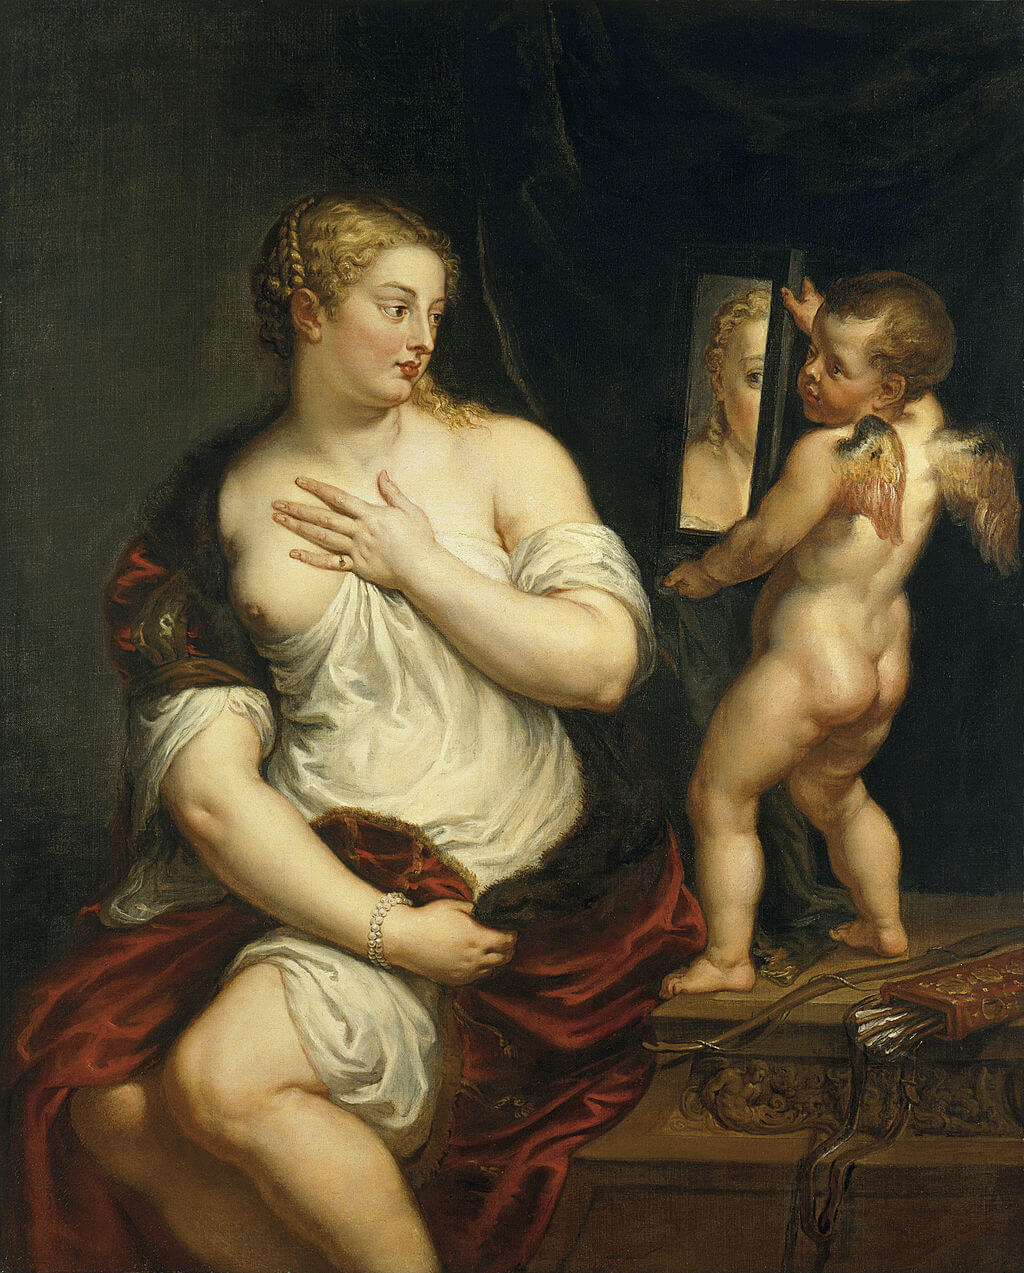 Venus and Cupid by Peter Paul Rubens in the Thyssen-Bornemisza Museum in Madrid